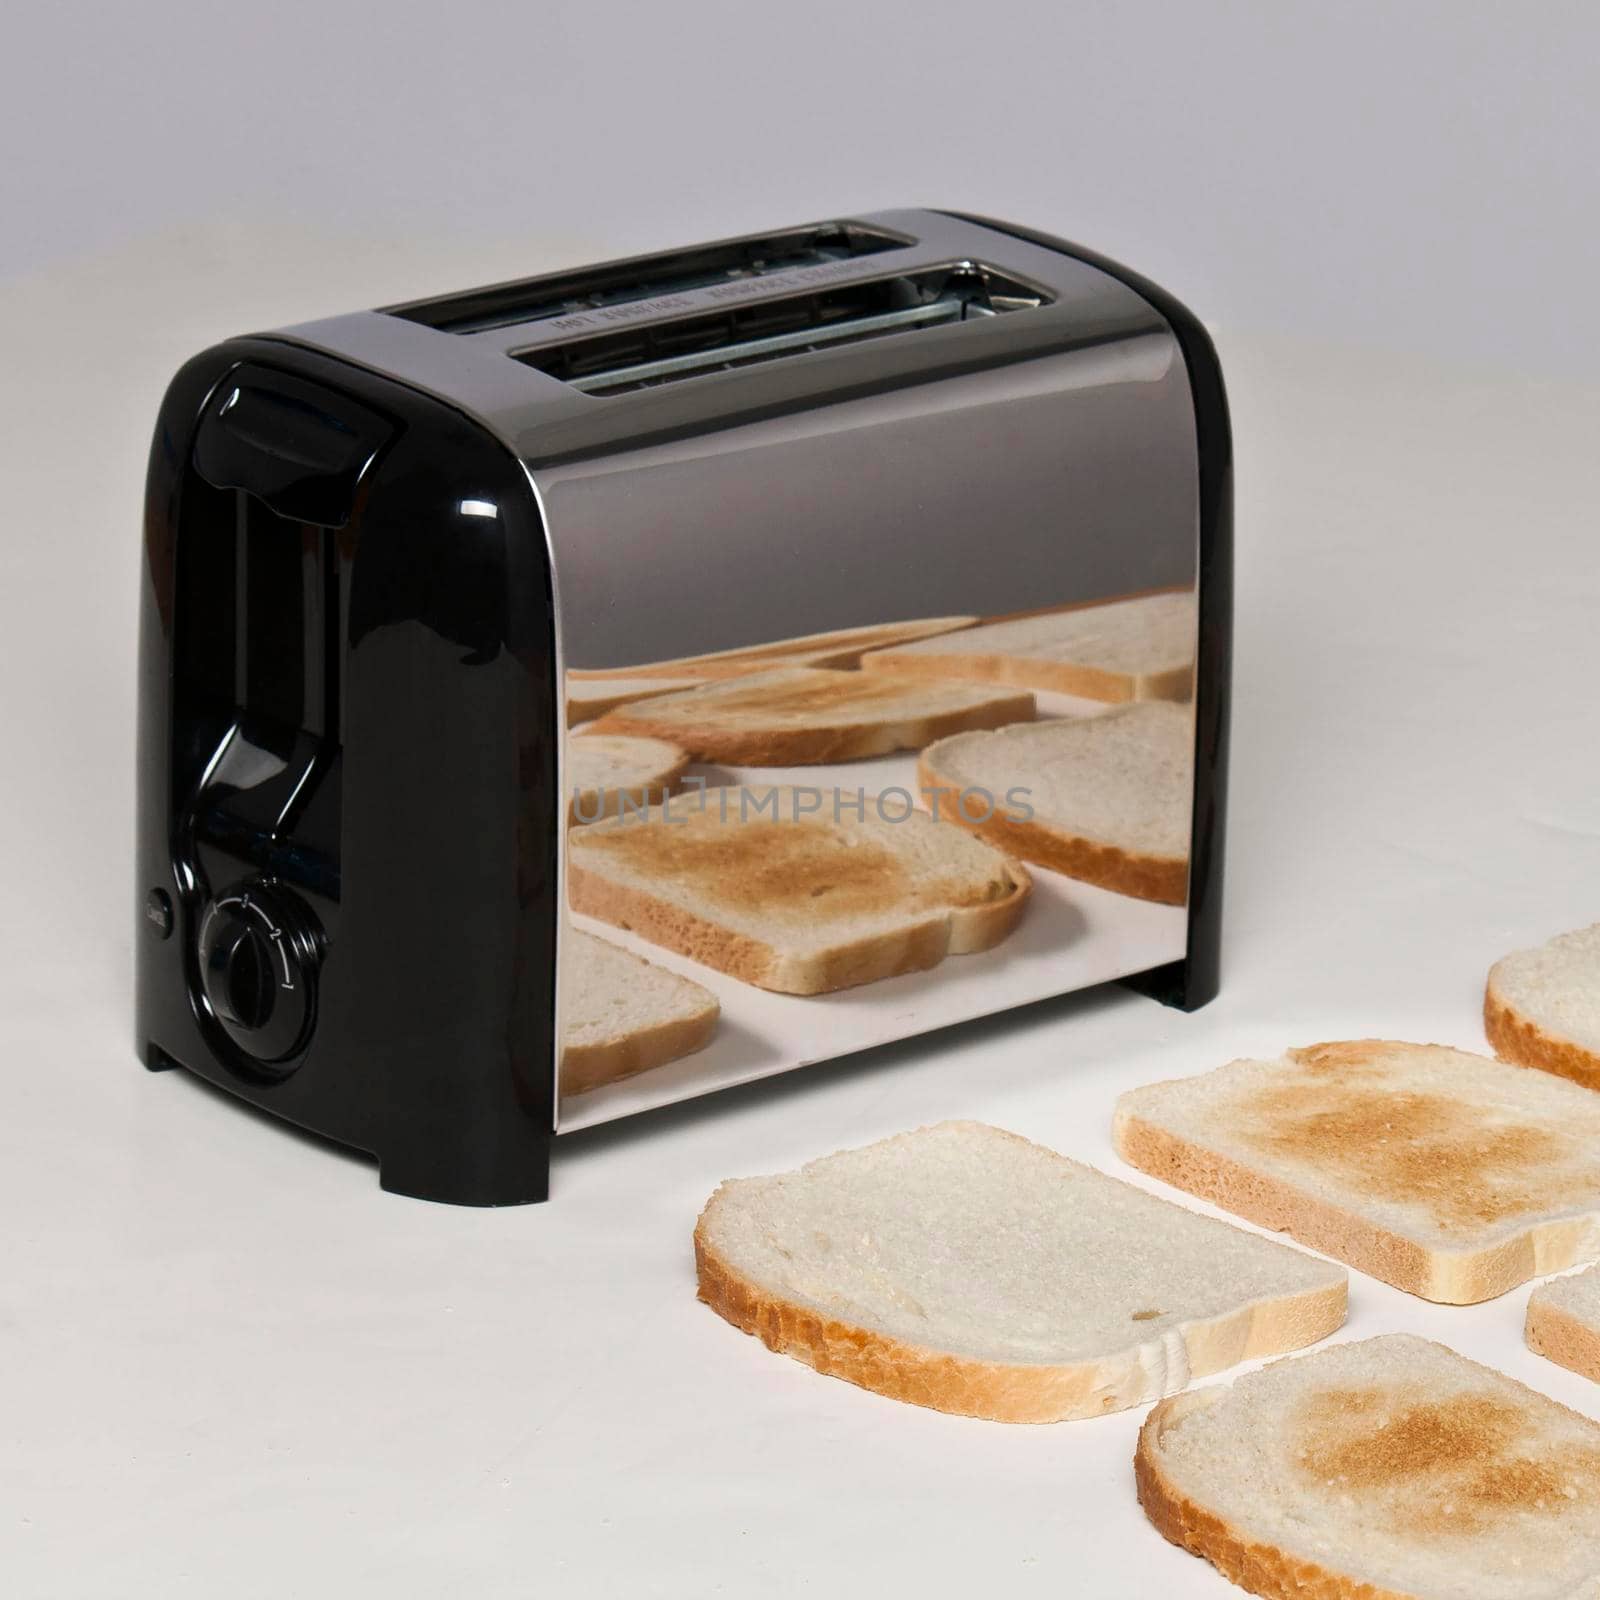 Conceptual image of toaster with bread by jyurinko